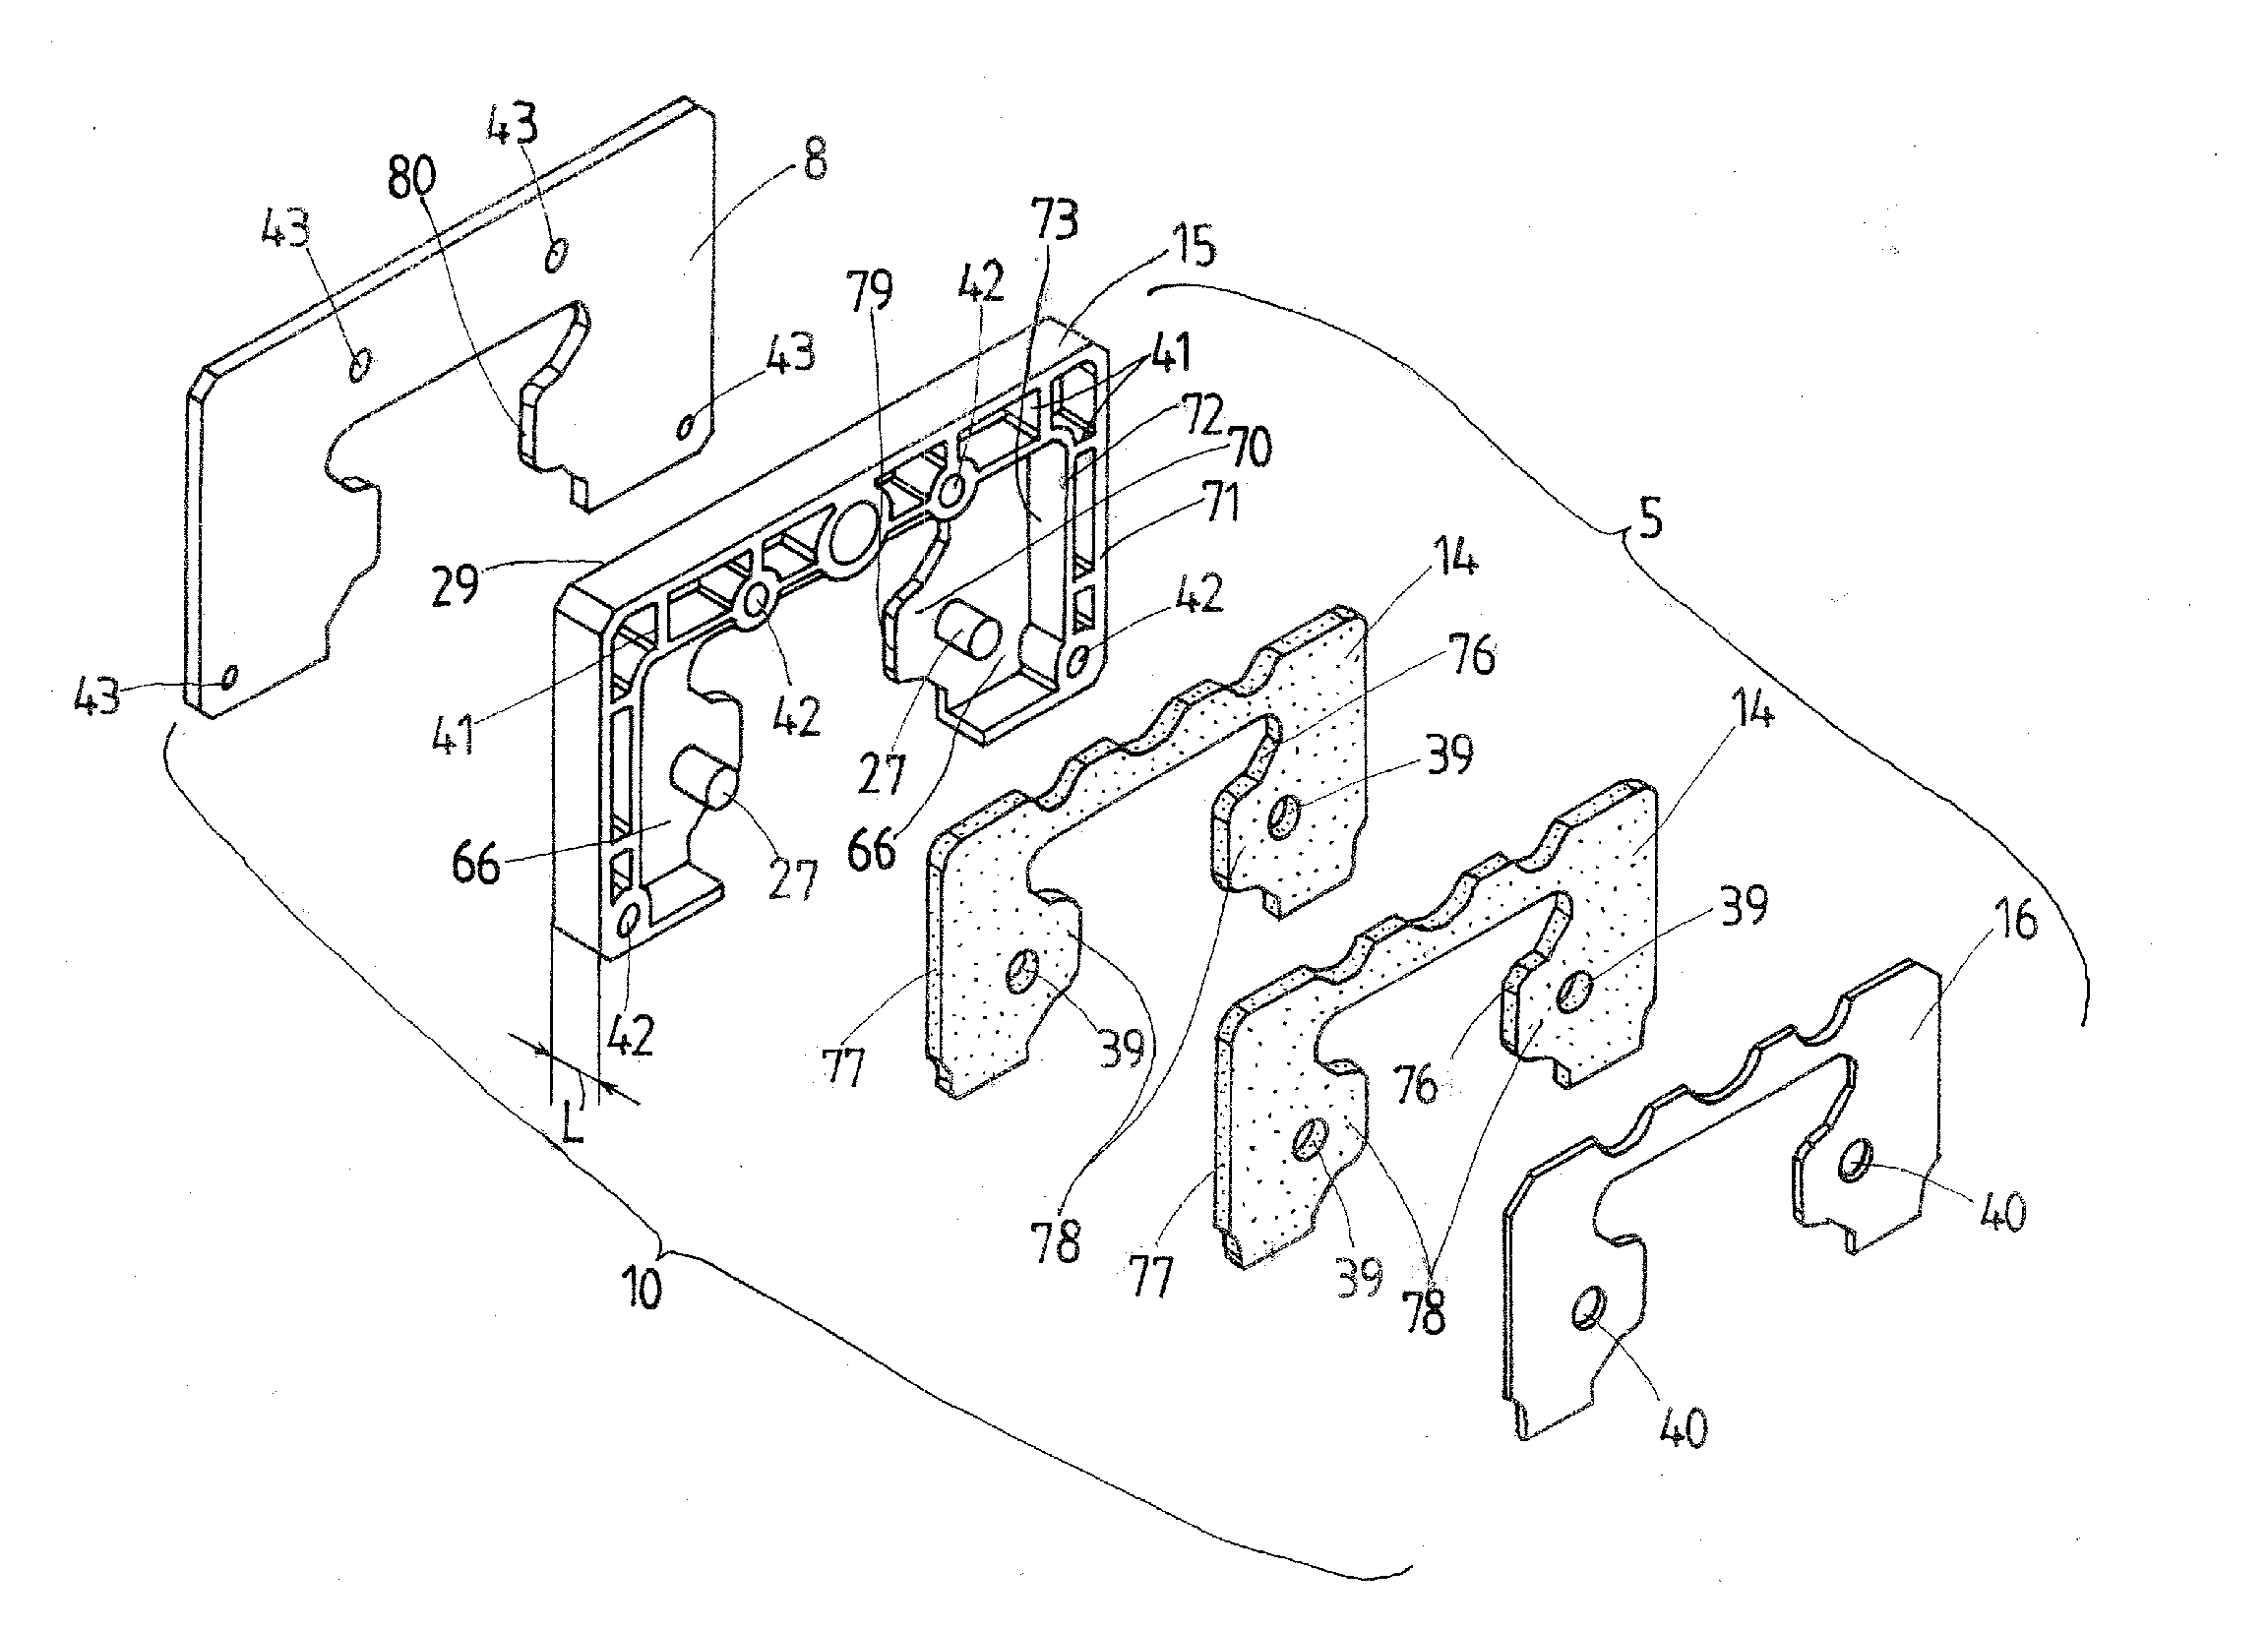 Linear motion guide system with wiper seal